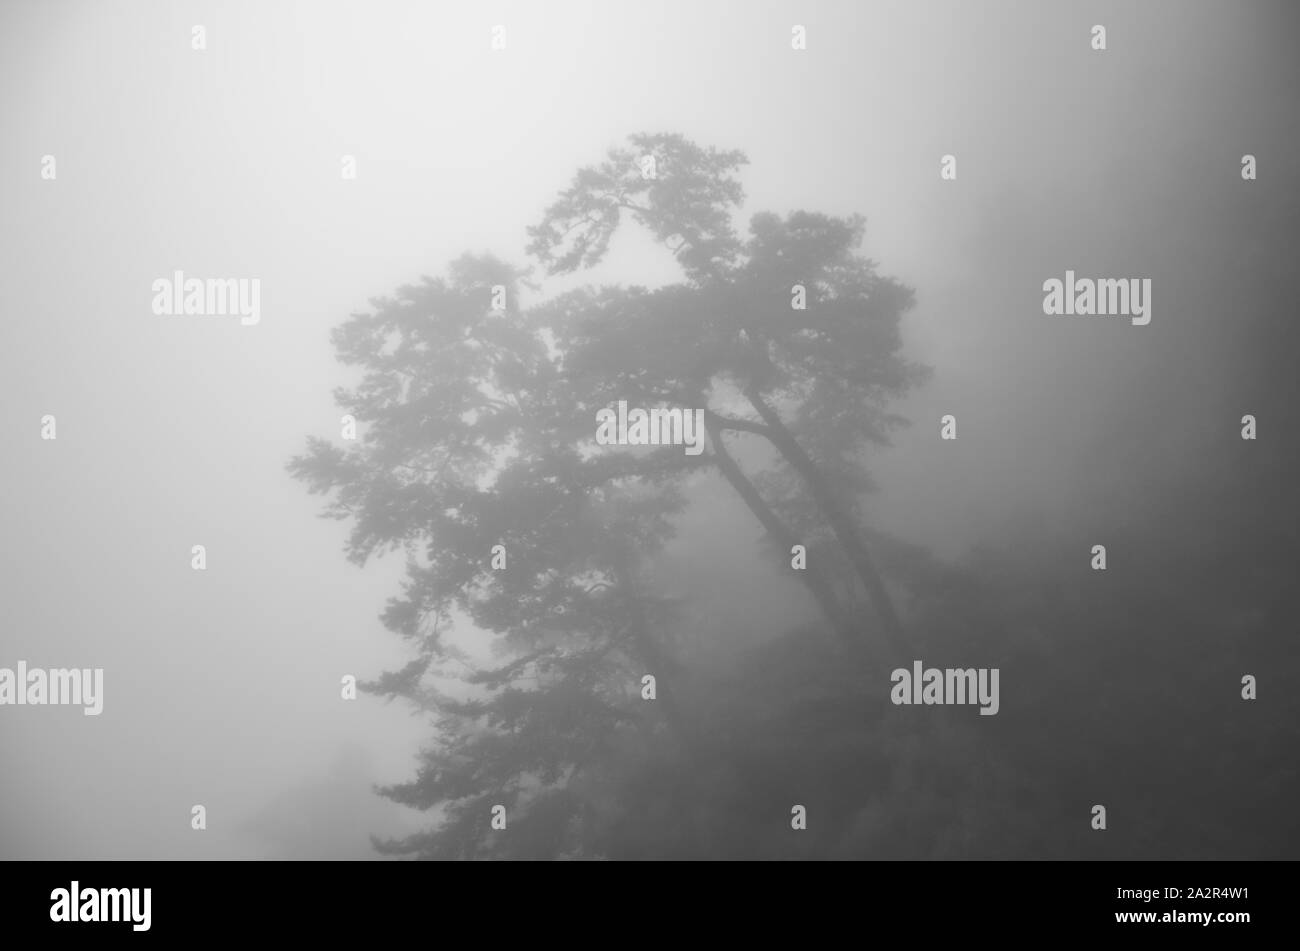 Scary horror tree in dark foggy forest. Horror, mysterious, fantasy atmosphere. Misty landscape, moody. Halloween background. Black and white photography. Stock Photo